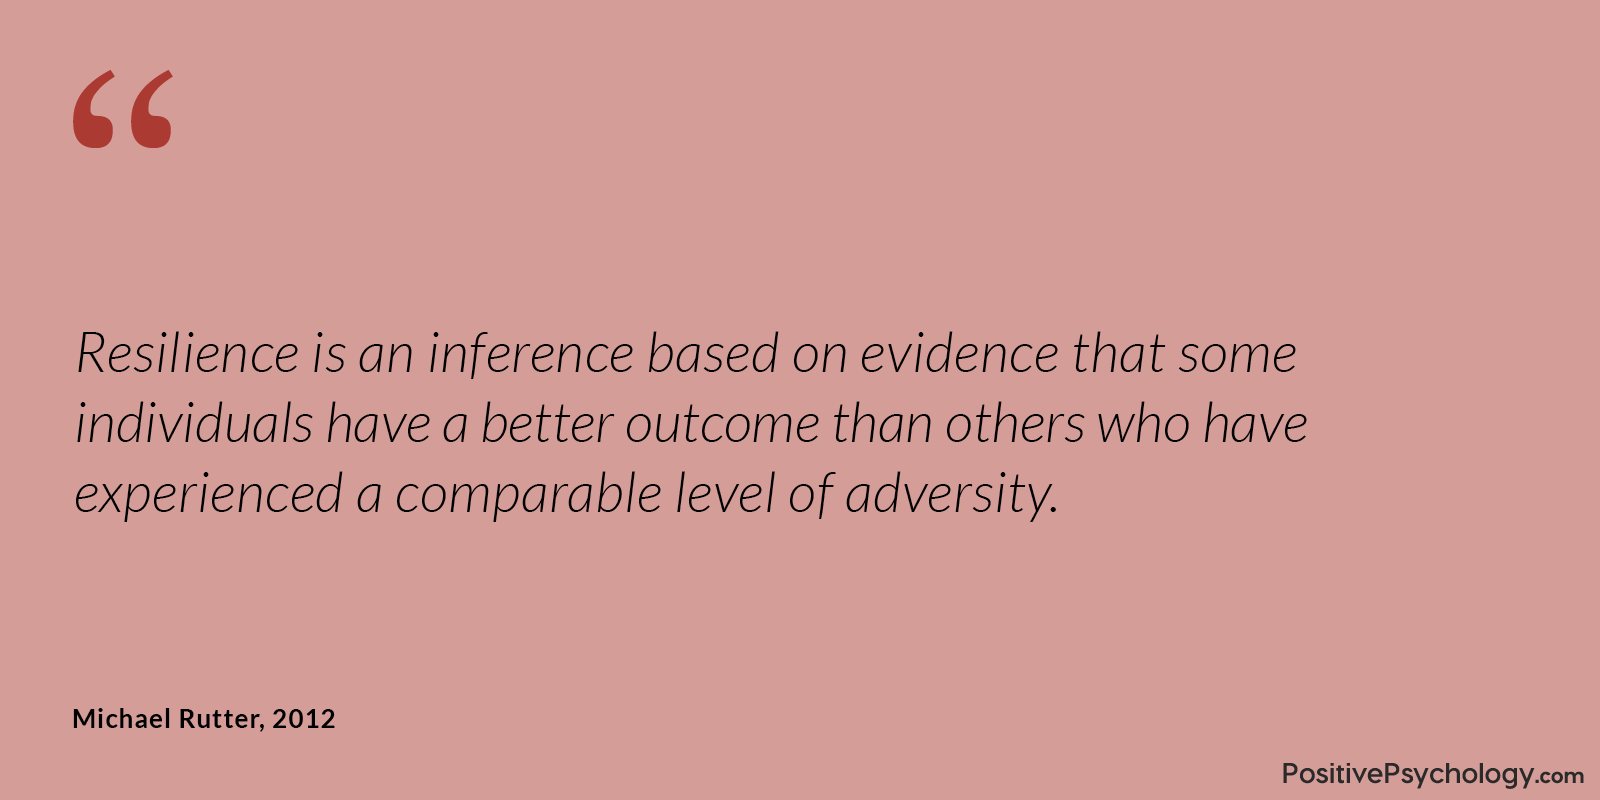 Rutter Resilience Better Outcome Quote